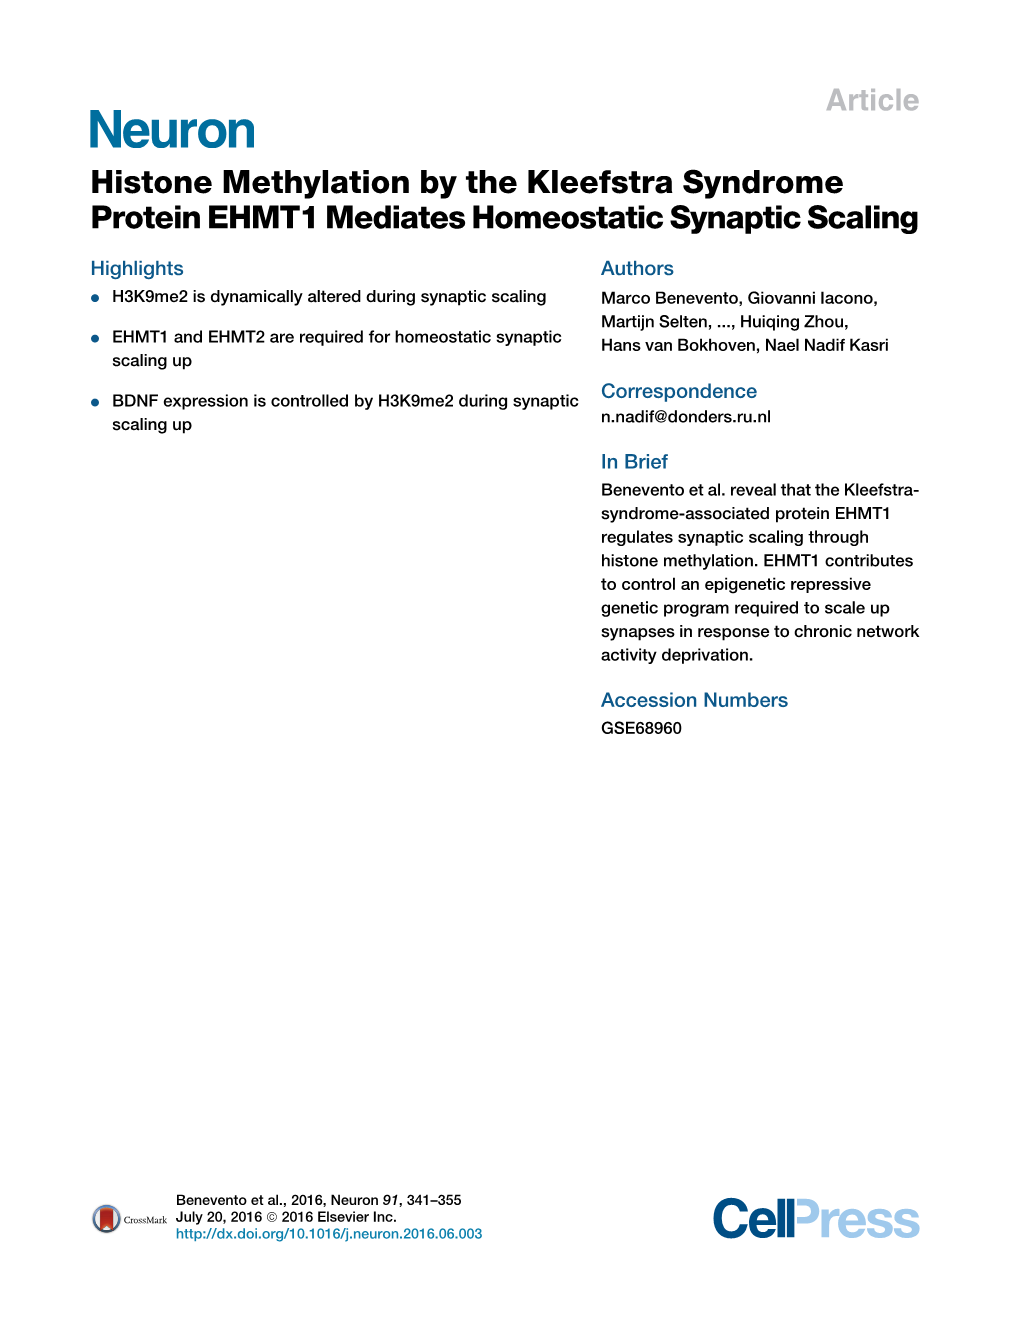 Histone Methylation by the Kleefstra Syndrome Protein EHMT1 Mediates Homeostatic Synaptic Scaling